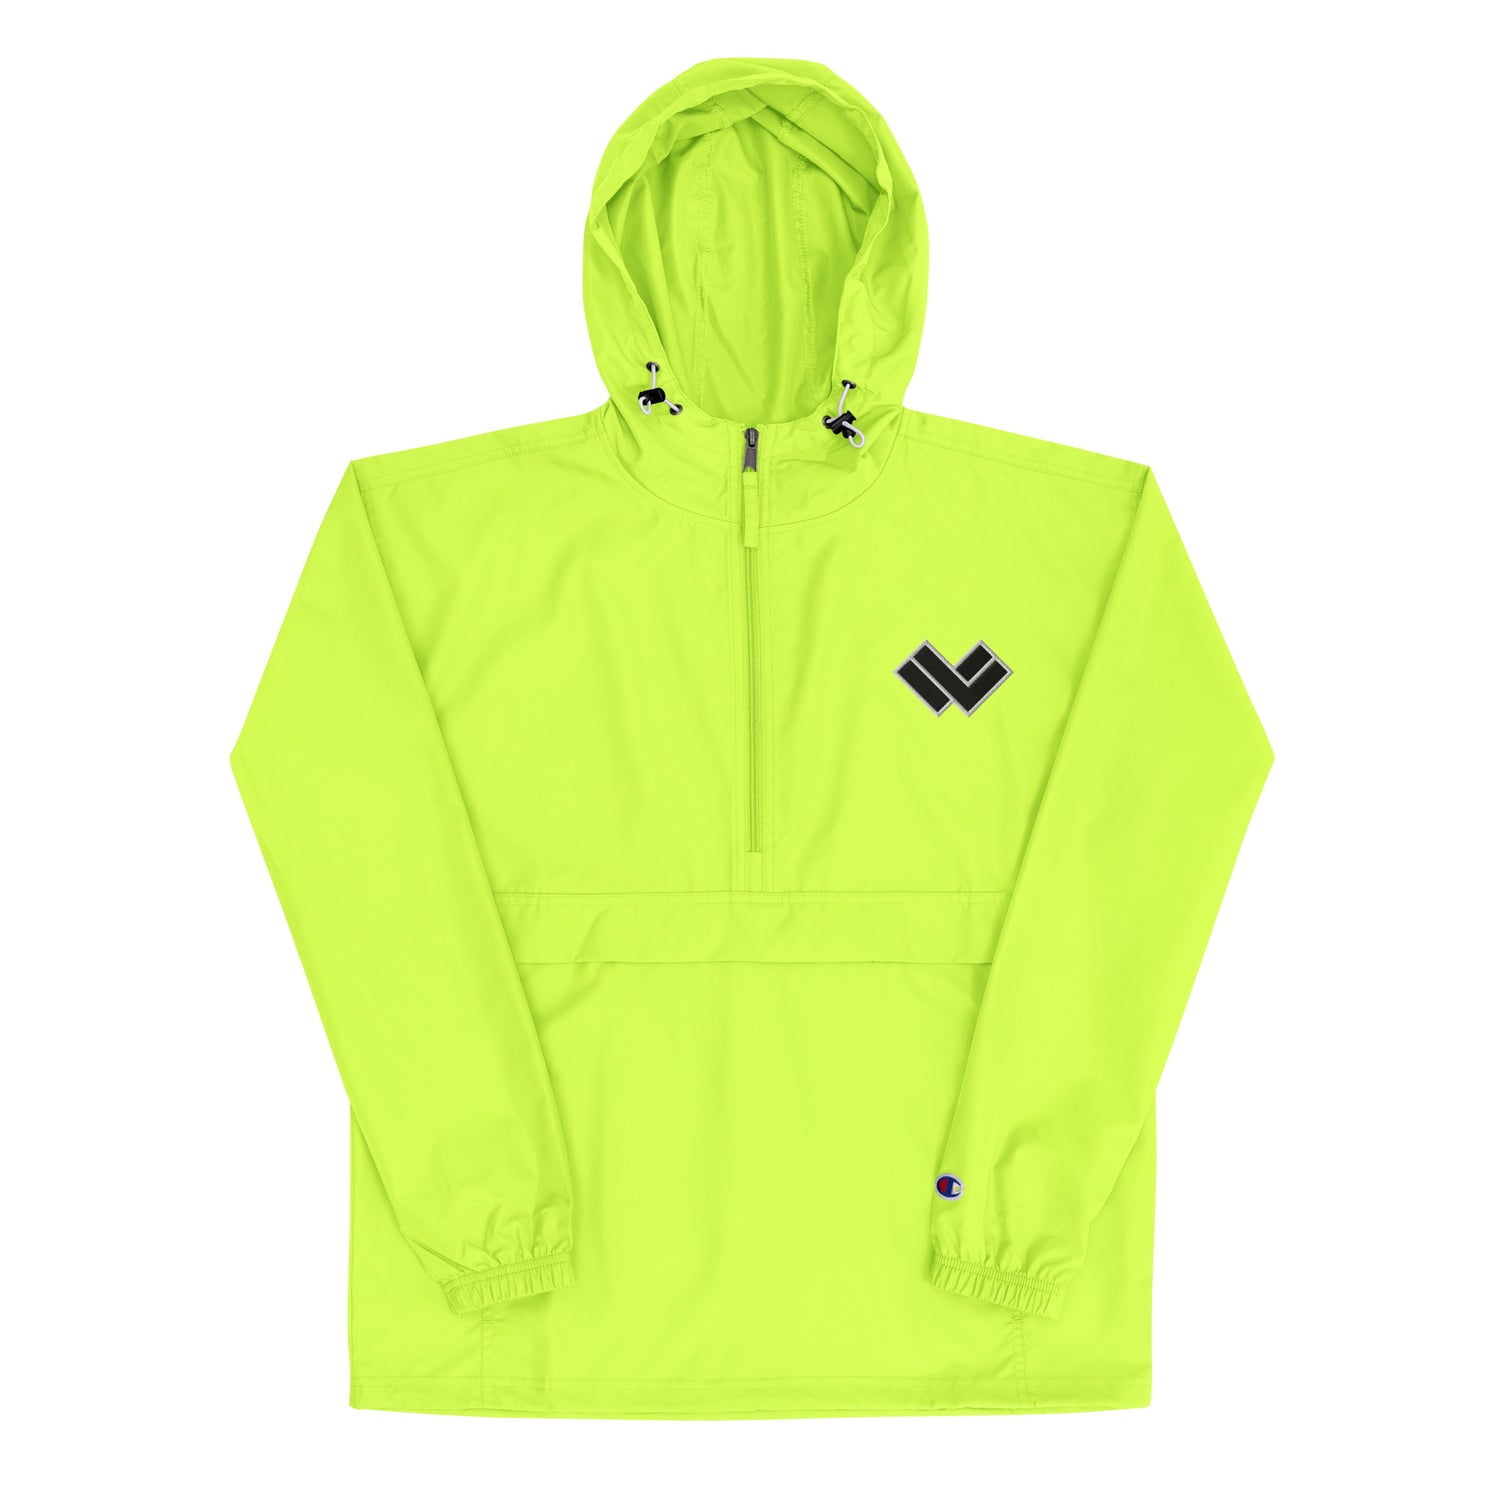 Women's “Lax World x Champion” Cradle Multi-shaded Packable Lacrosse Jacket Green Front 